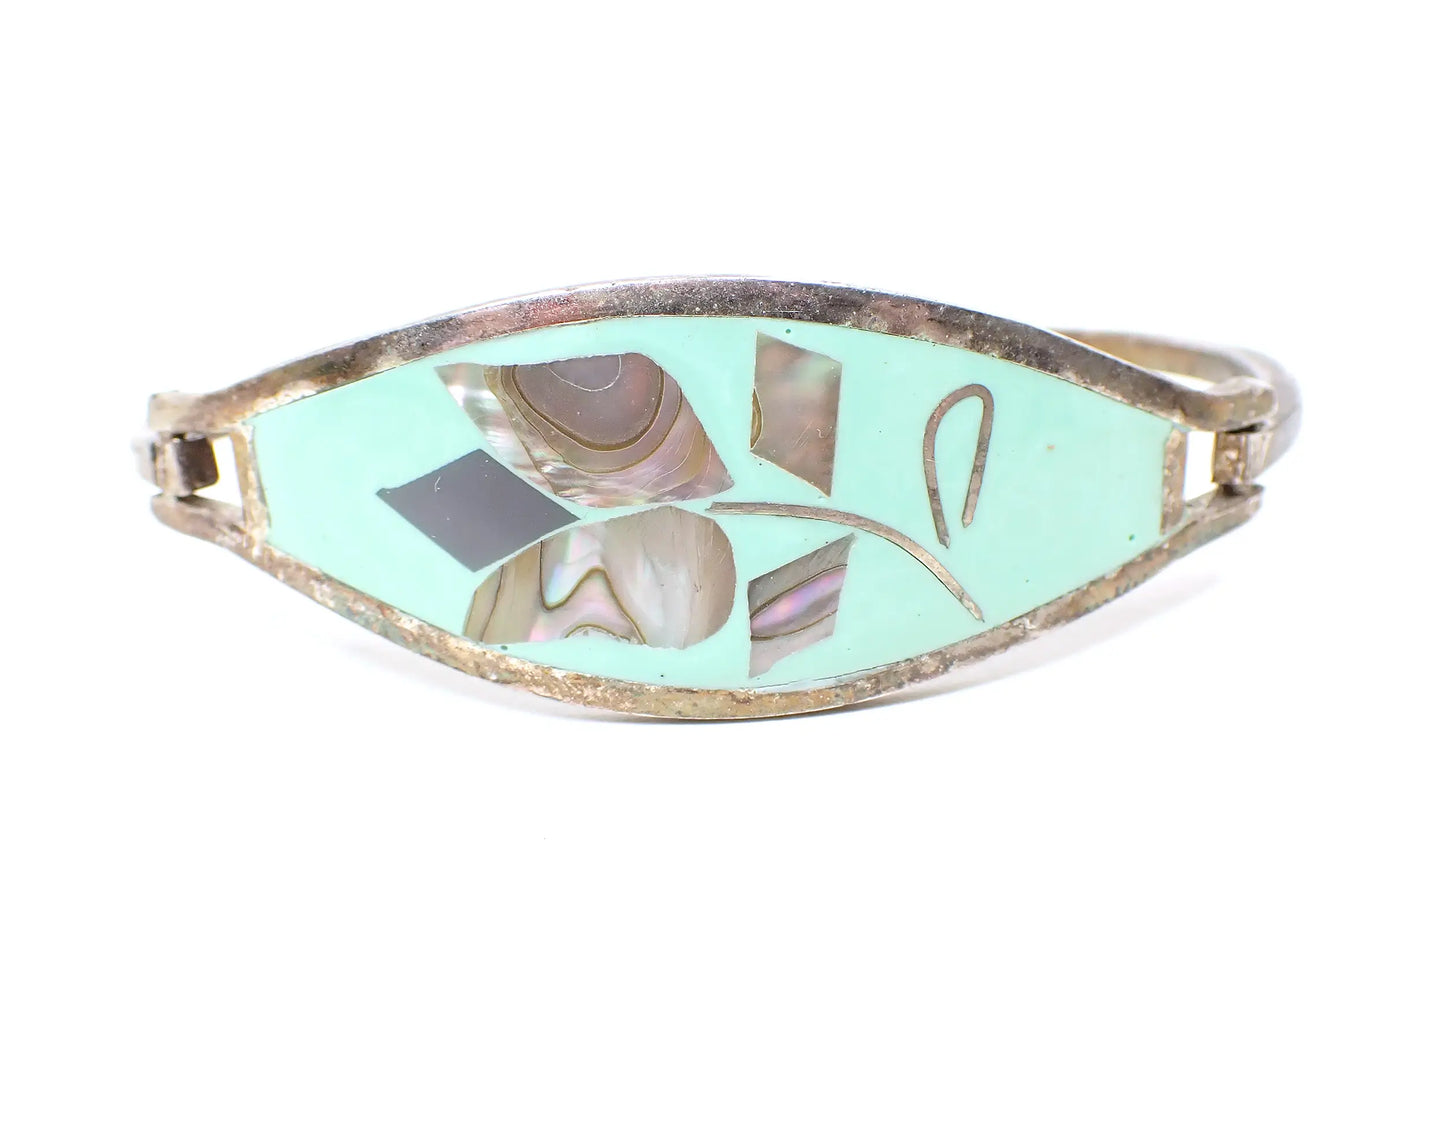 Mint Green Enameled Mexican Alpaca Retro Vintage Hinged Flower Bangle Bracelet with Abalone Shell, Southwestern Jewelry